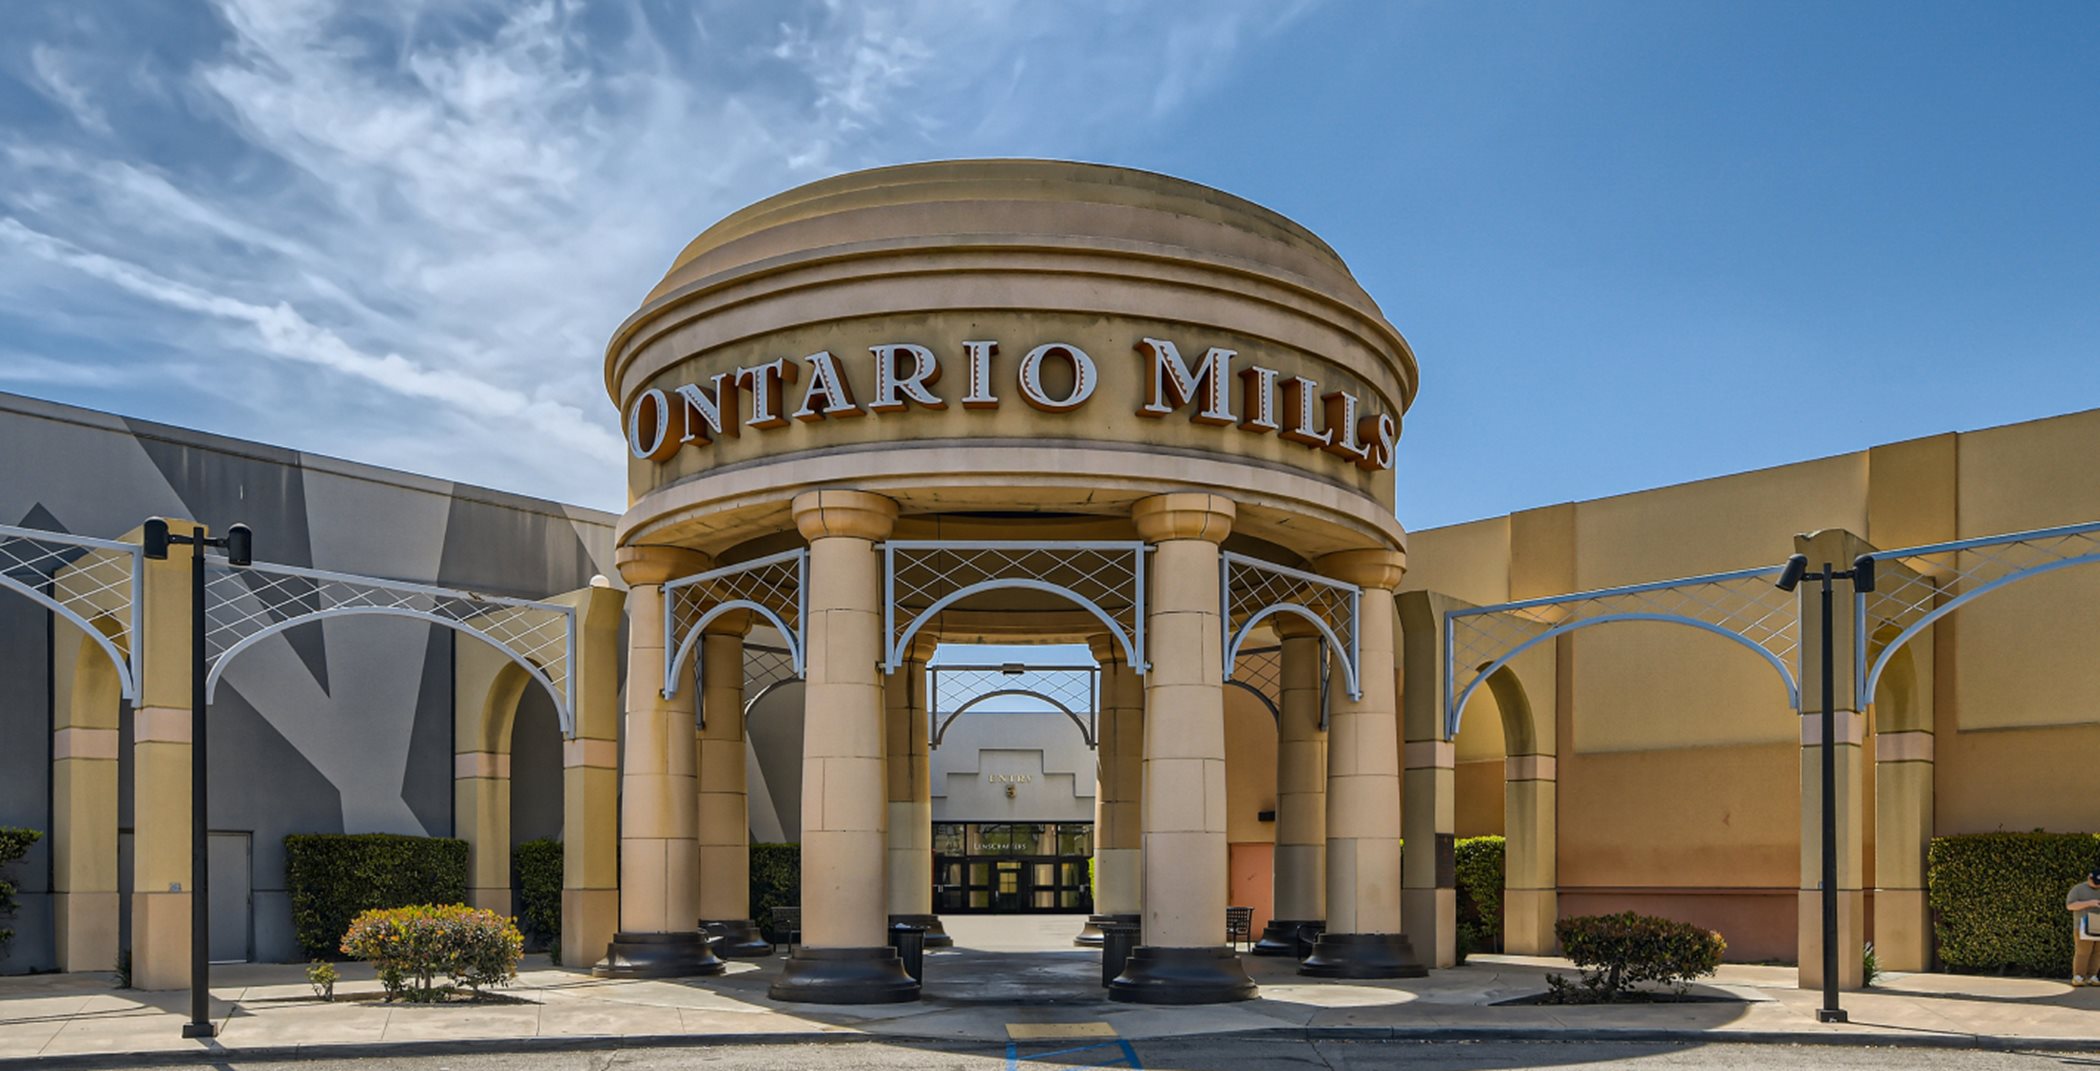 Entrance to Ontario Mills Mall